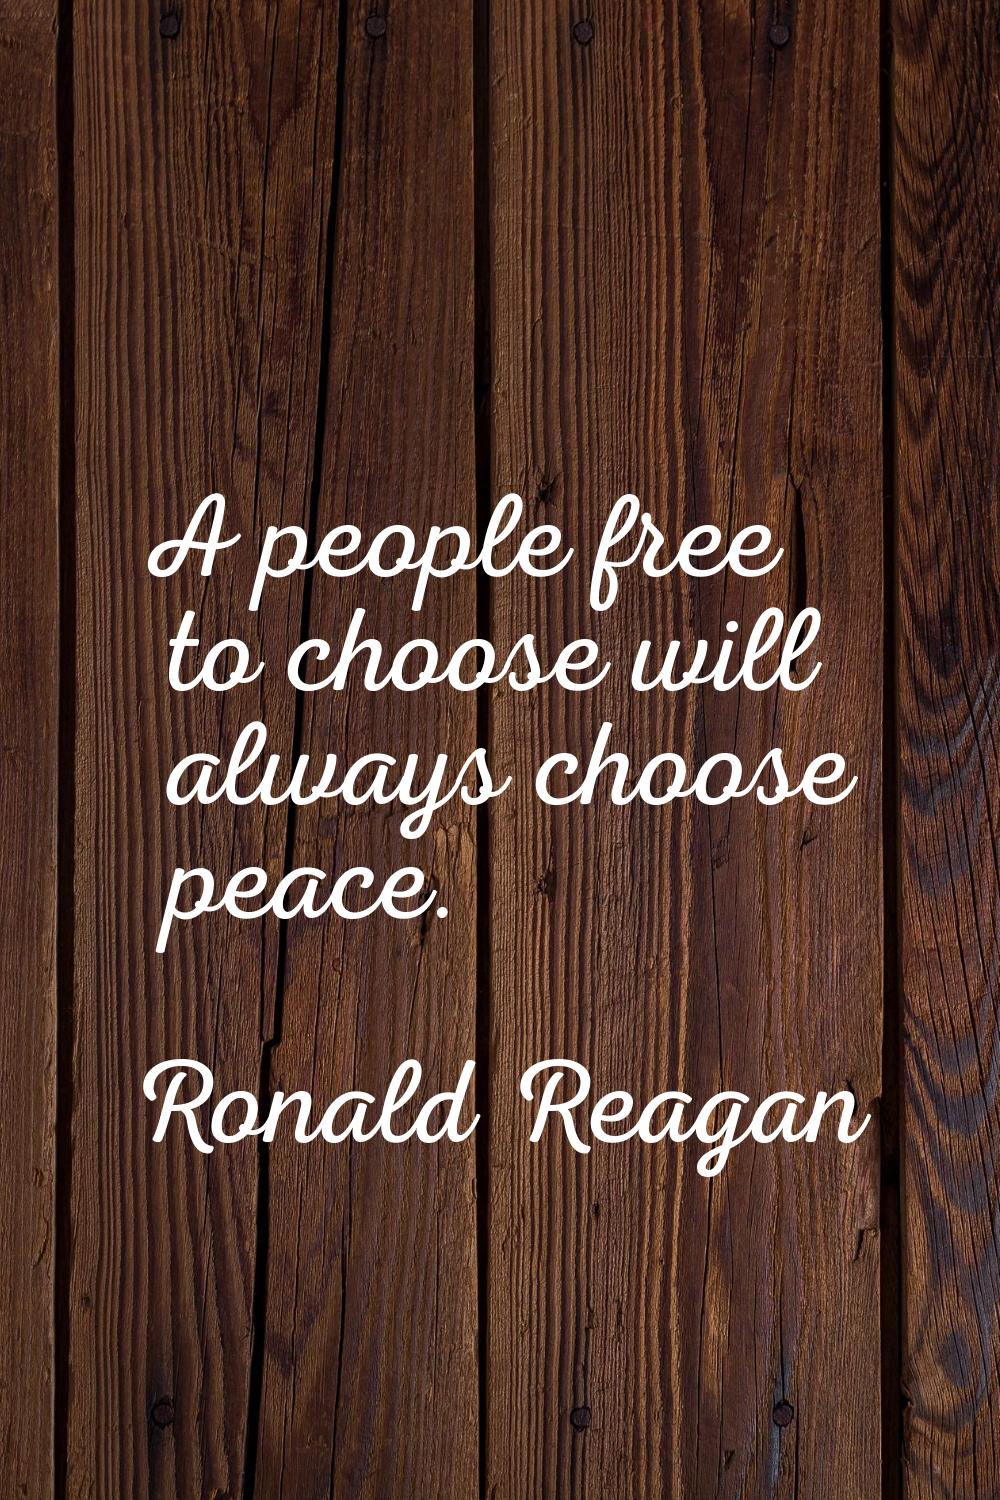 A people free to choose will always choose peace.